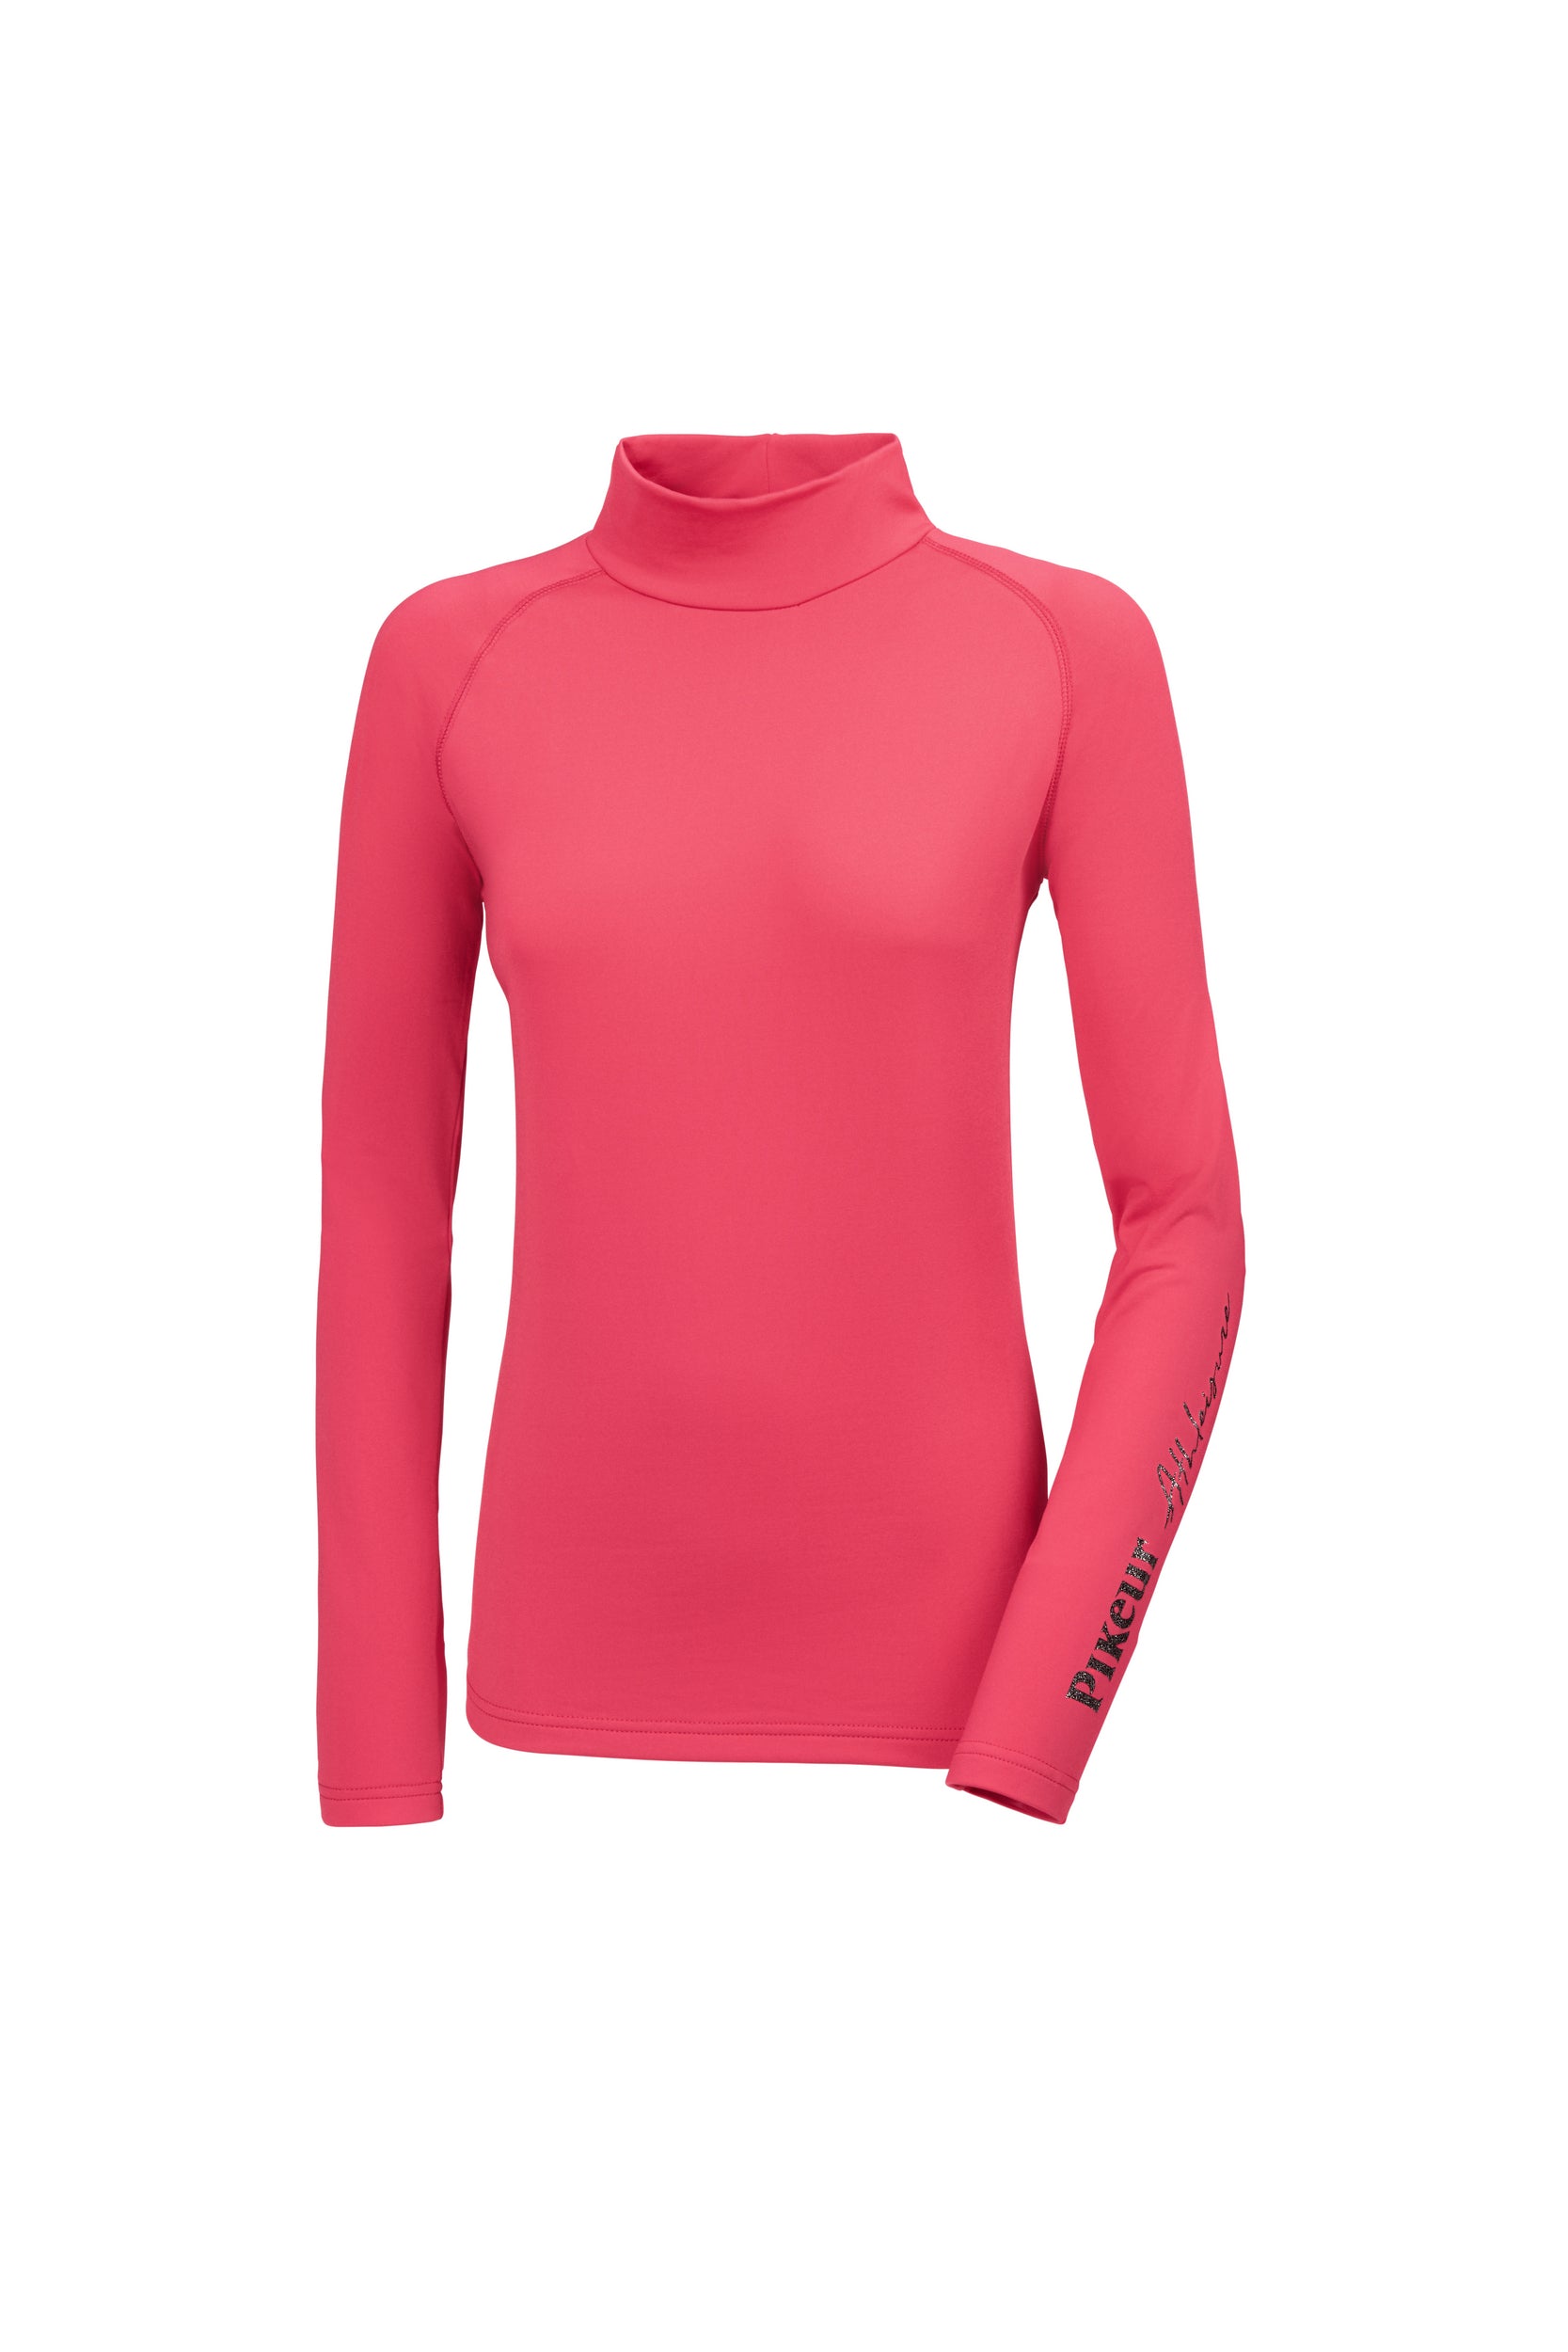 Pikeur Abby Athleisure roll neck in Blush pink